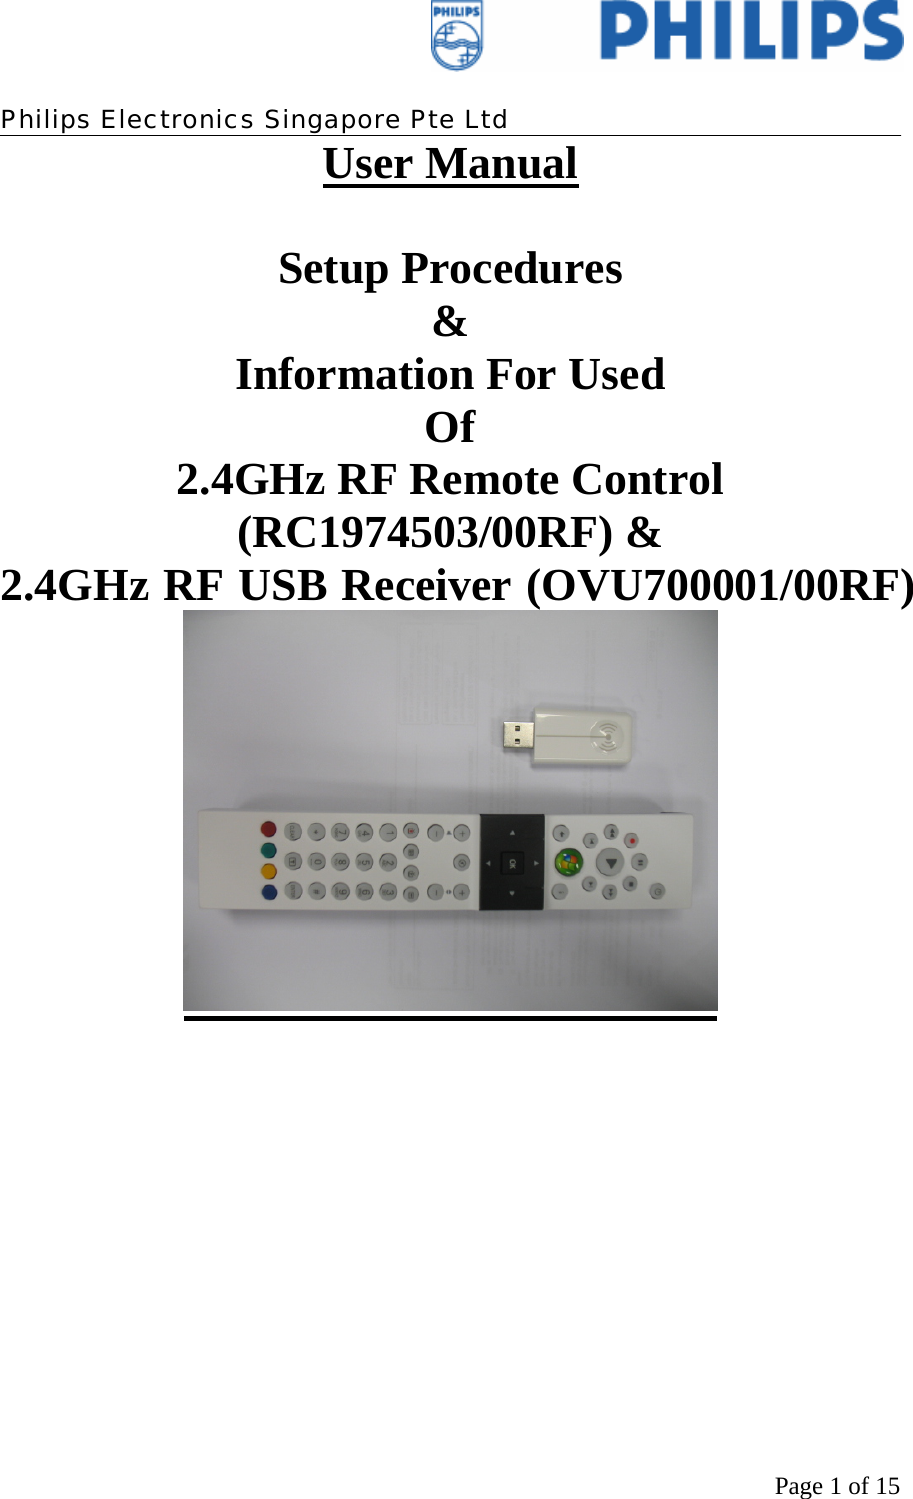    Philips Electronics Singapore Pte Ltd  Page 1 of 15User Manual  Setup Procedures &amp; Information For Used Of 2.4GHz RF Remote Control (RC1974503/00RF) &amp;  2.4GHz RF USB Receiver (OVU700001/00RF)          